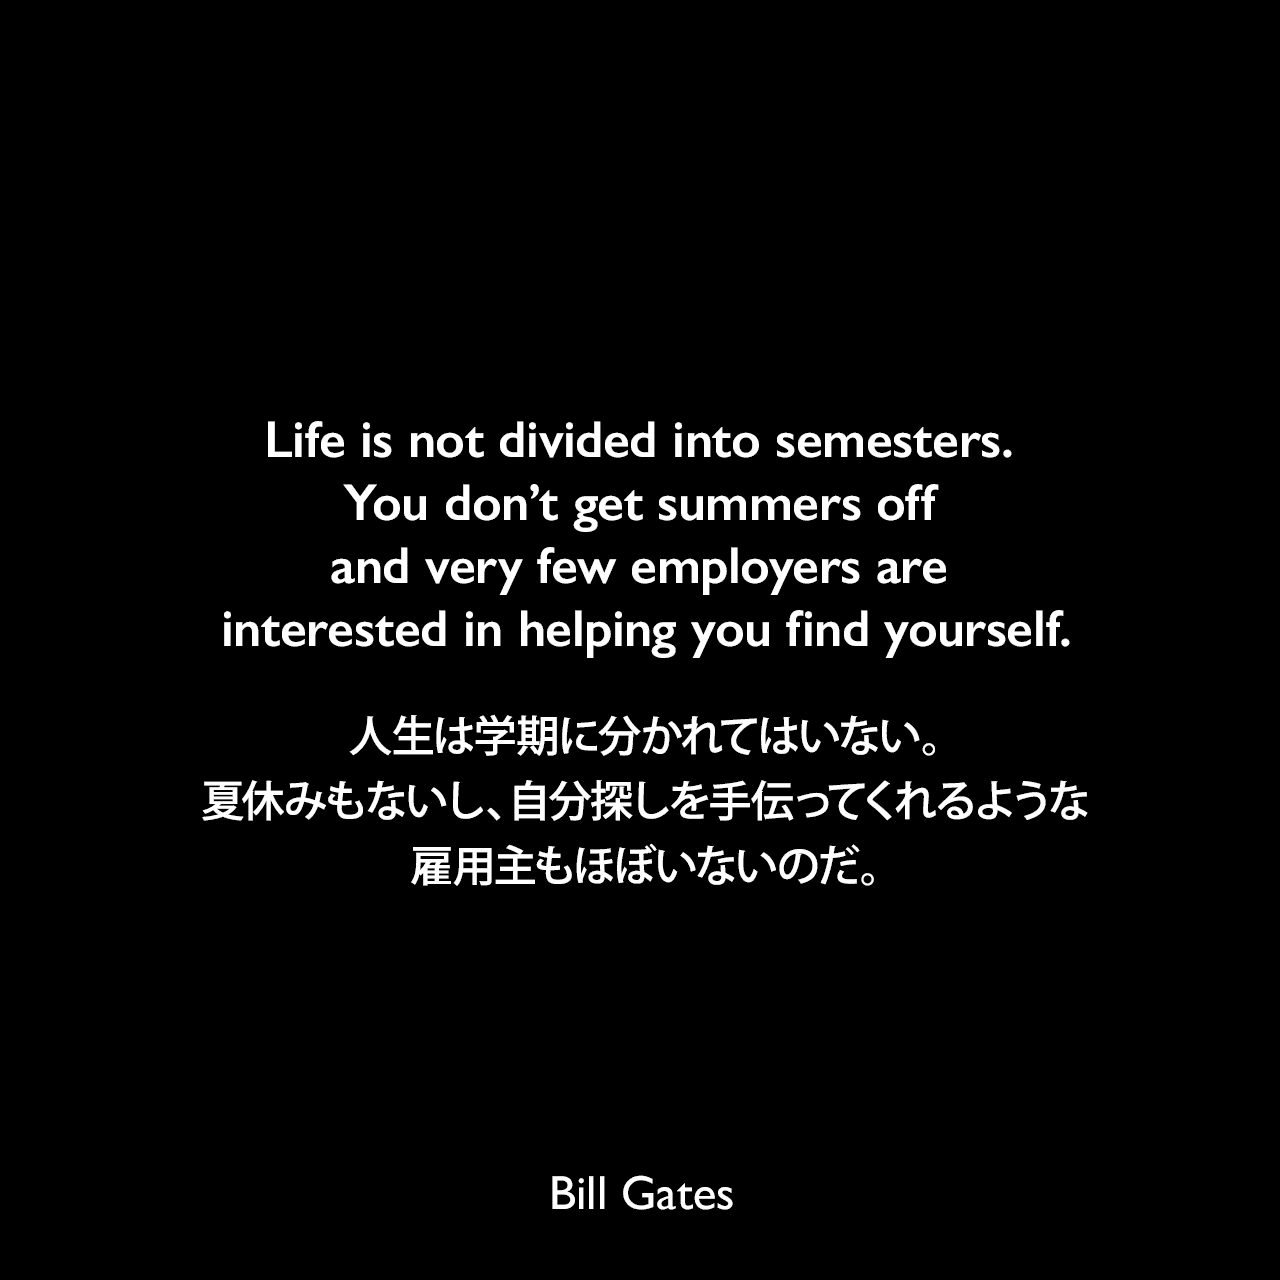 Life is not divided into semesters. You don’t get summers off and very few employers are interested in helping you find yourself.人生は学期に分かれてはいない。夏休みもないし、自分探しを手伝ってくれるような雇用主もほぼいないのだ。Bill Gates